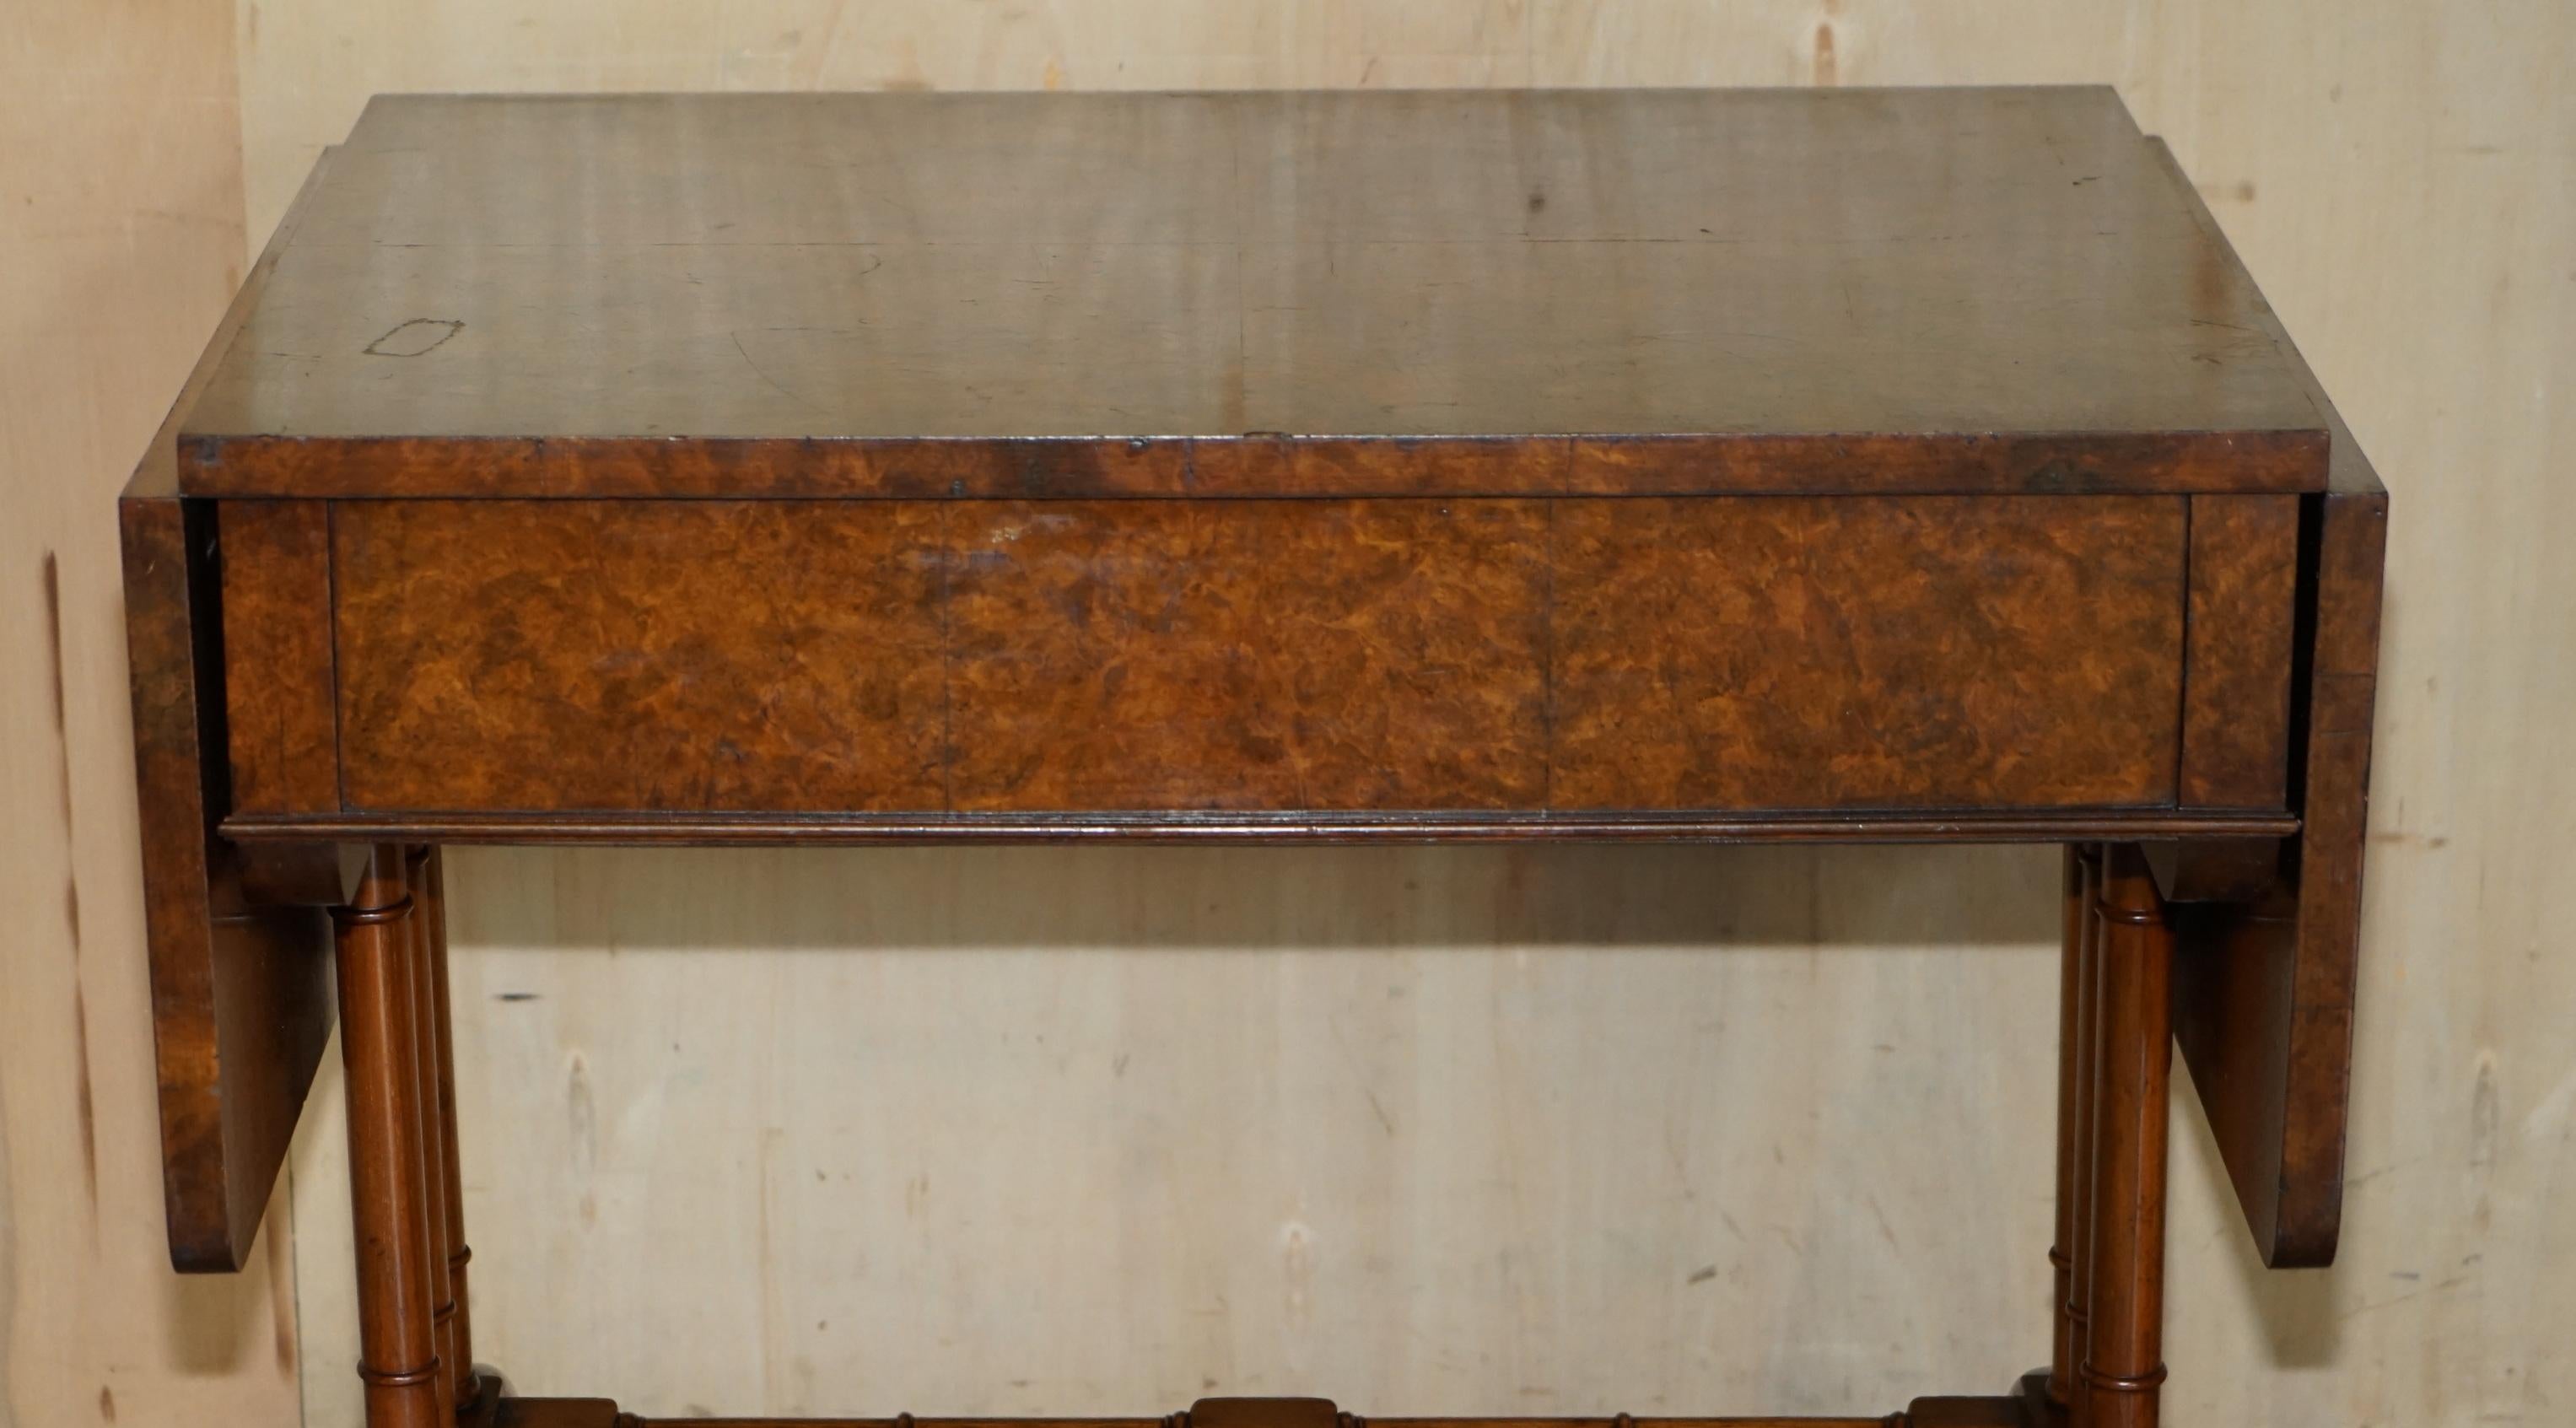 ANTIQUE CIRCA 1880 EXTRA LARGE BURR WALNUT EXTENDING SOFA TABLE STUNNING PATiNA For Sale 4